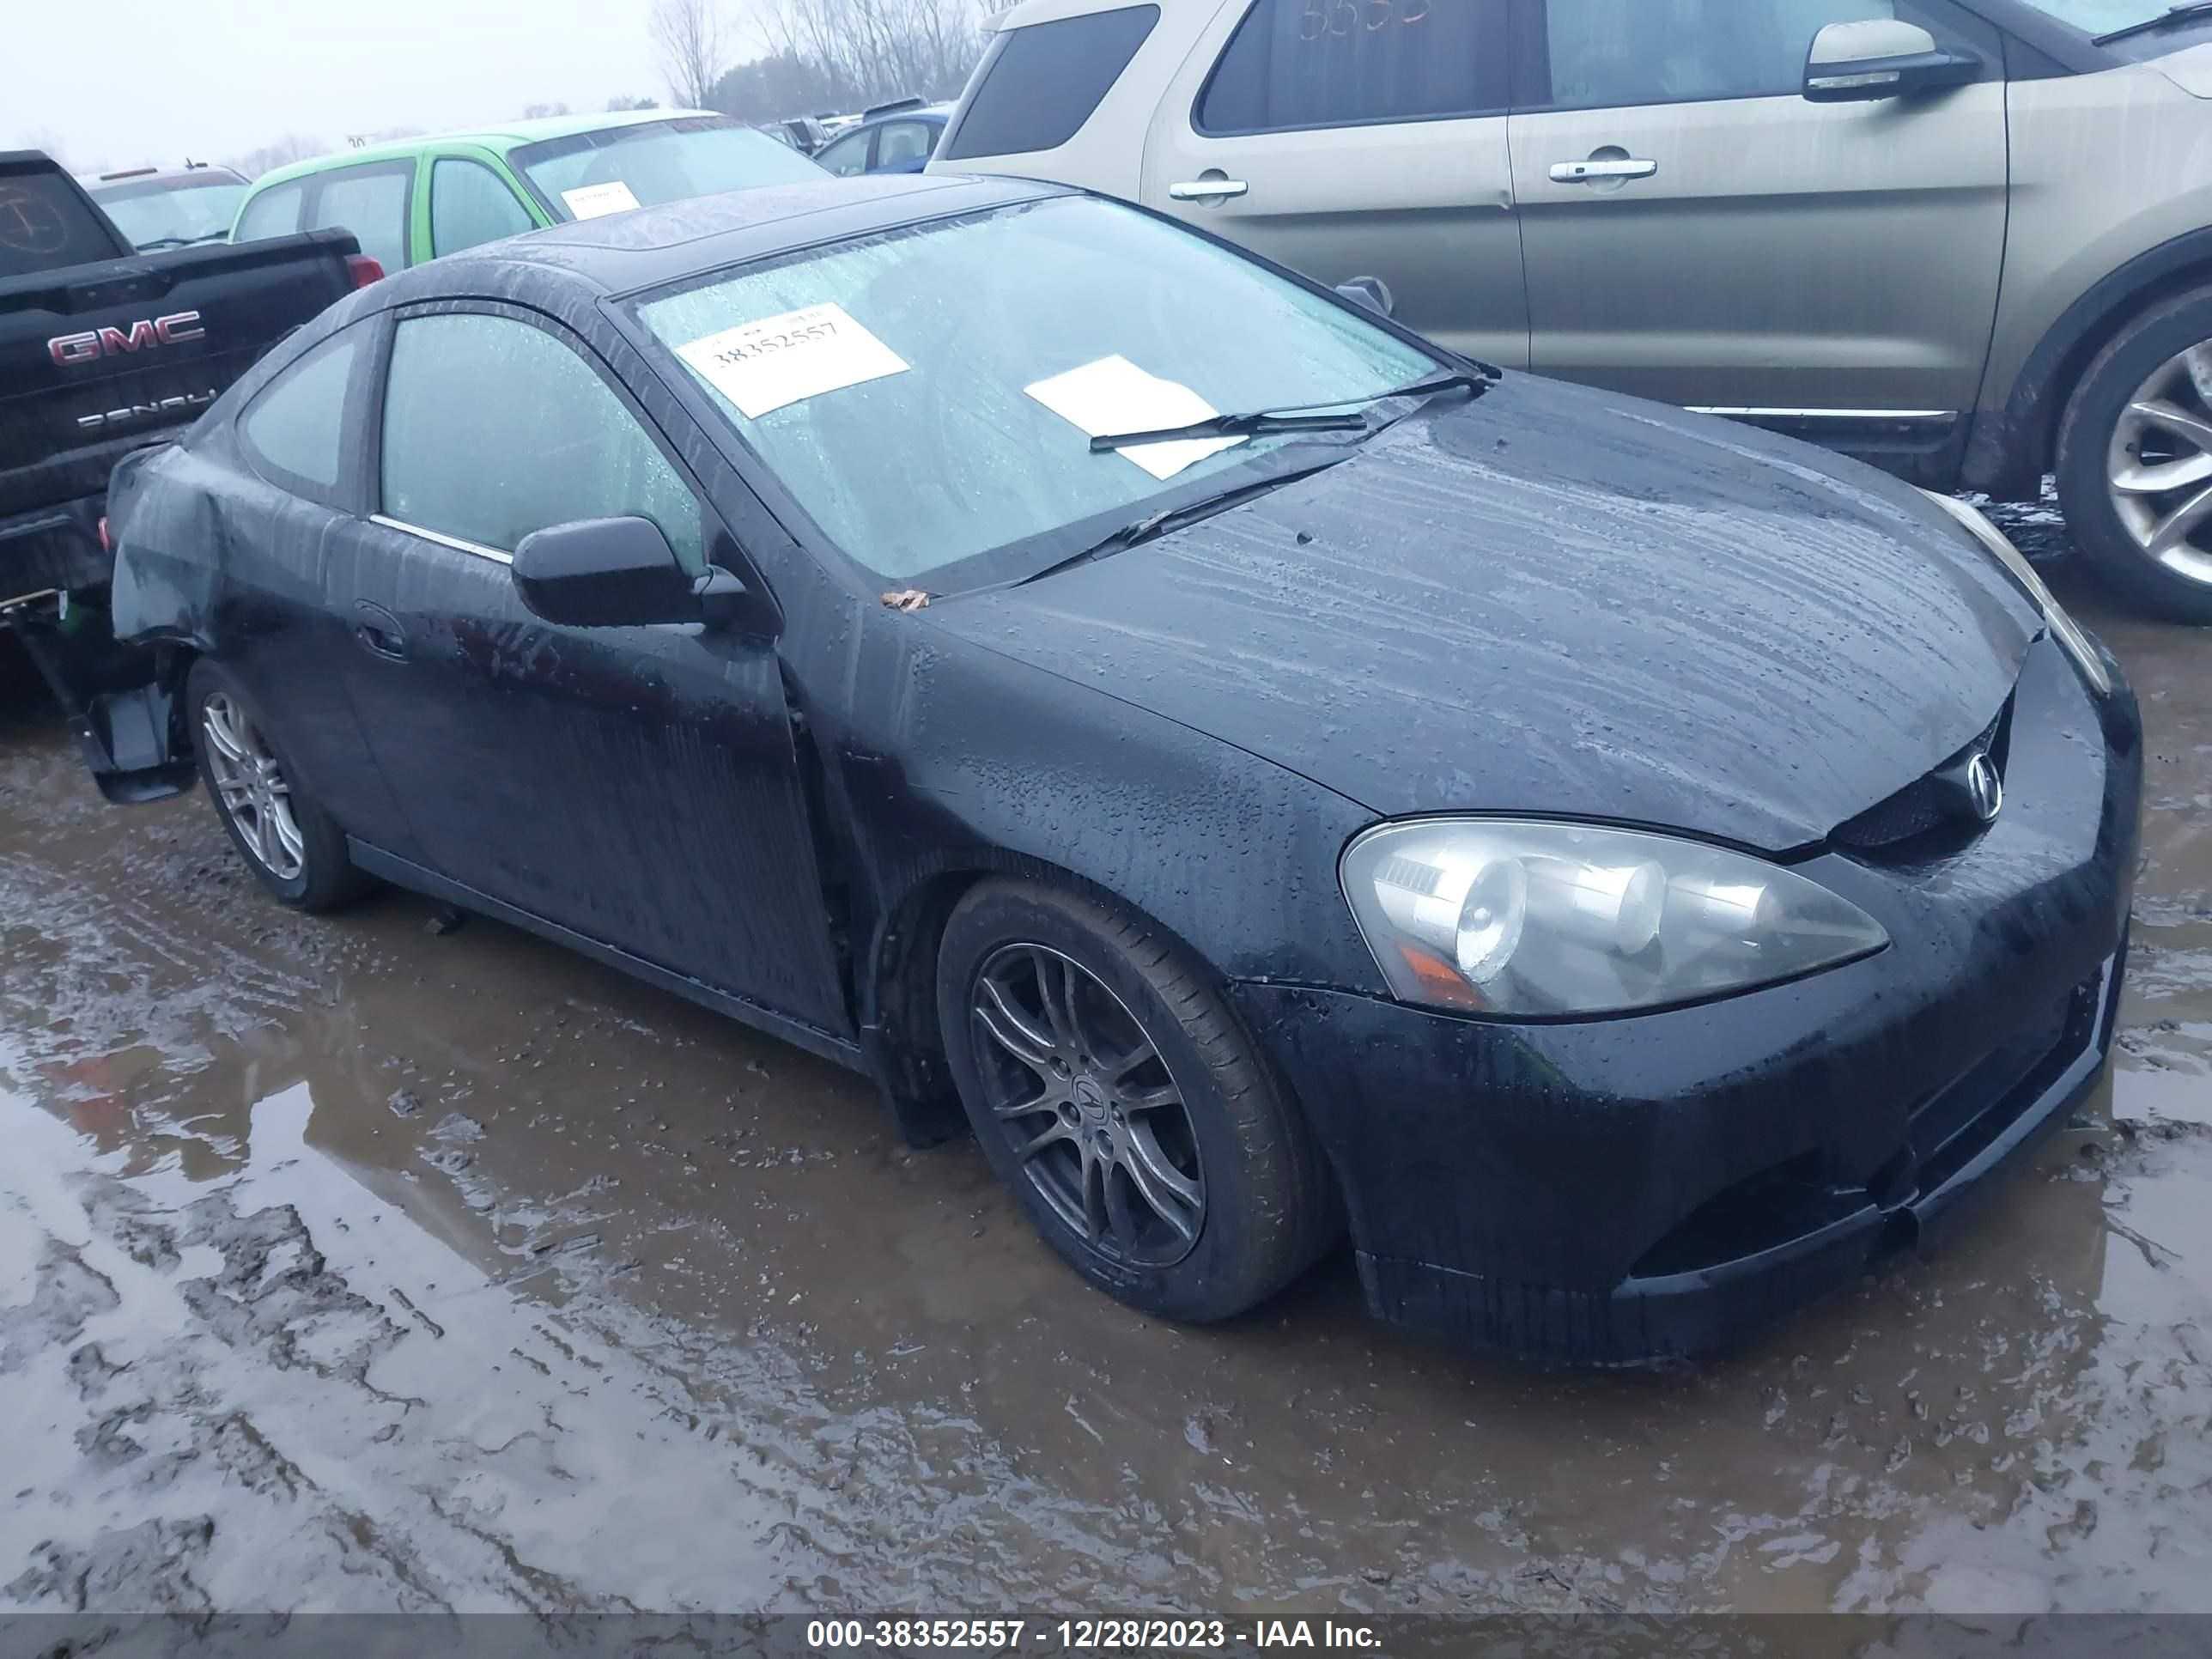 VIN: JH4DC548X5S011894 - acura rsx